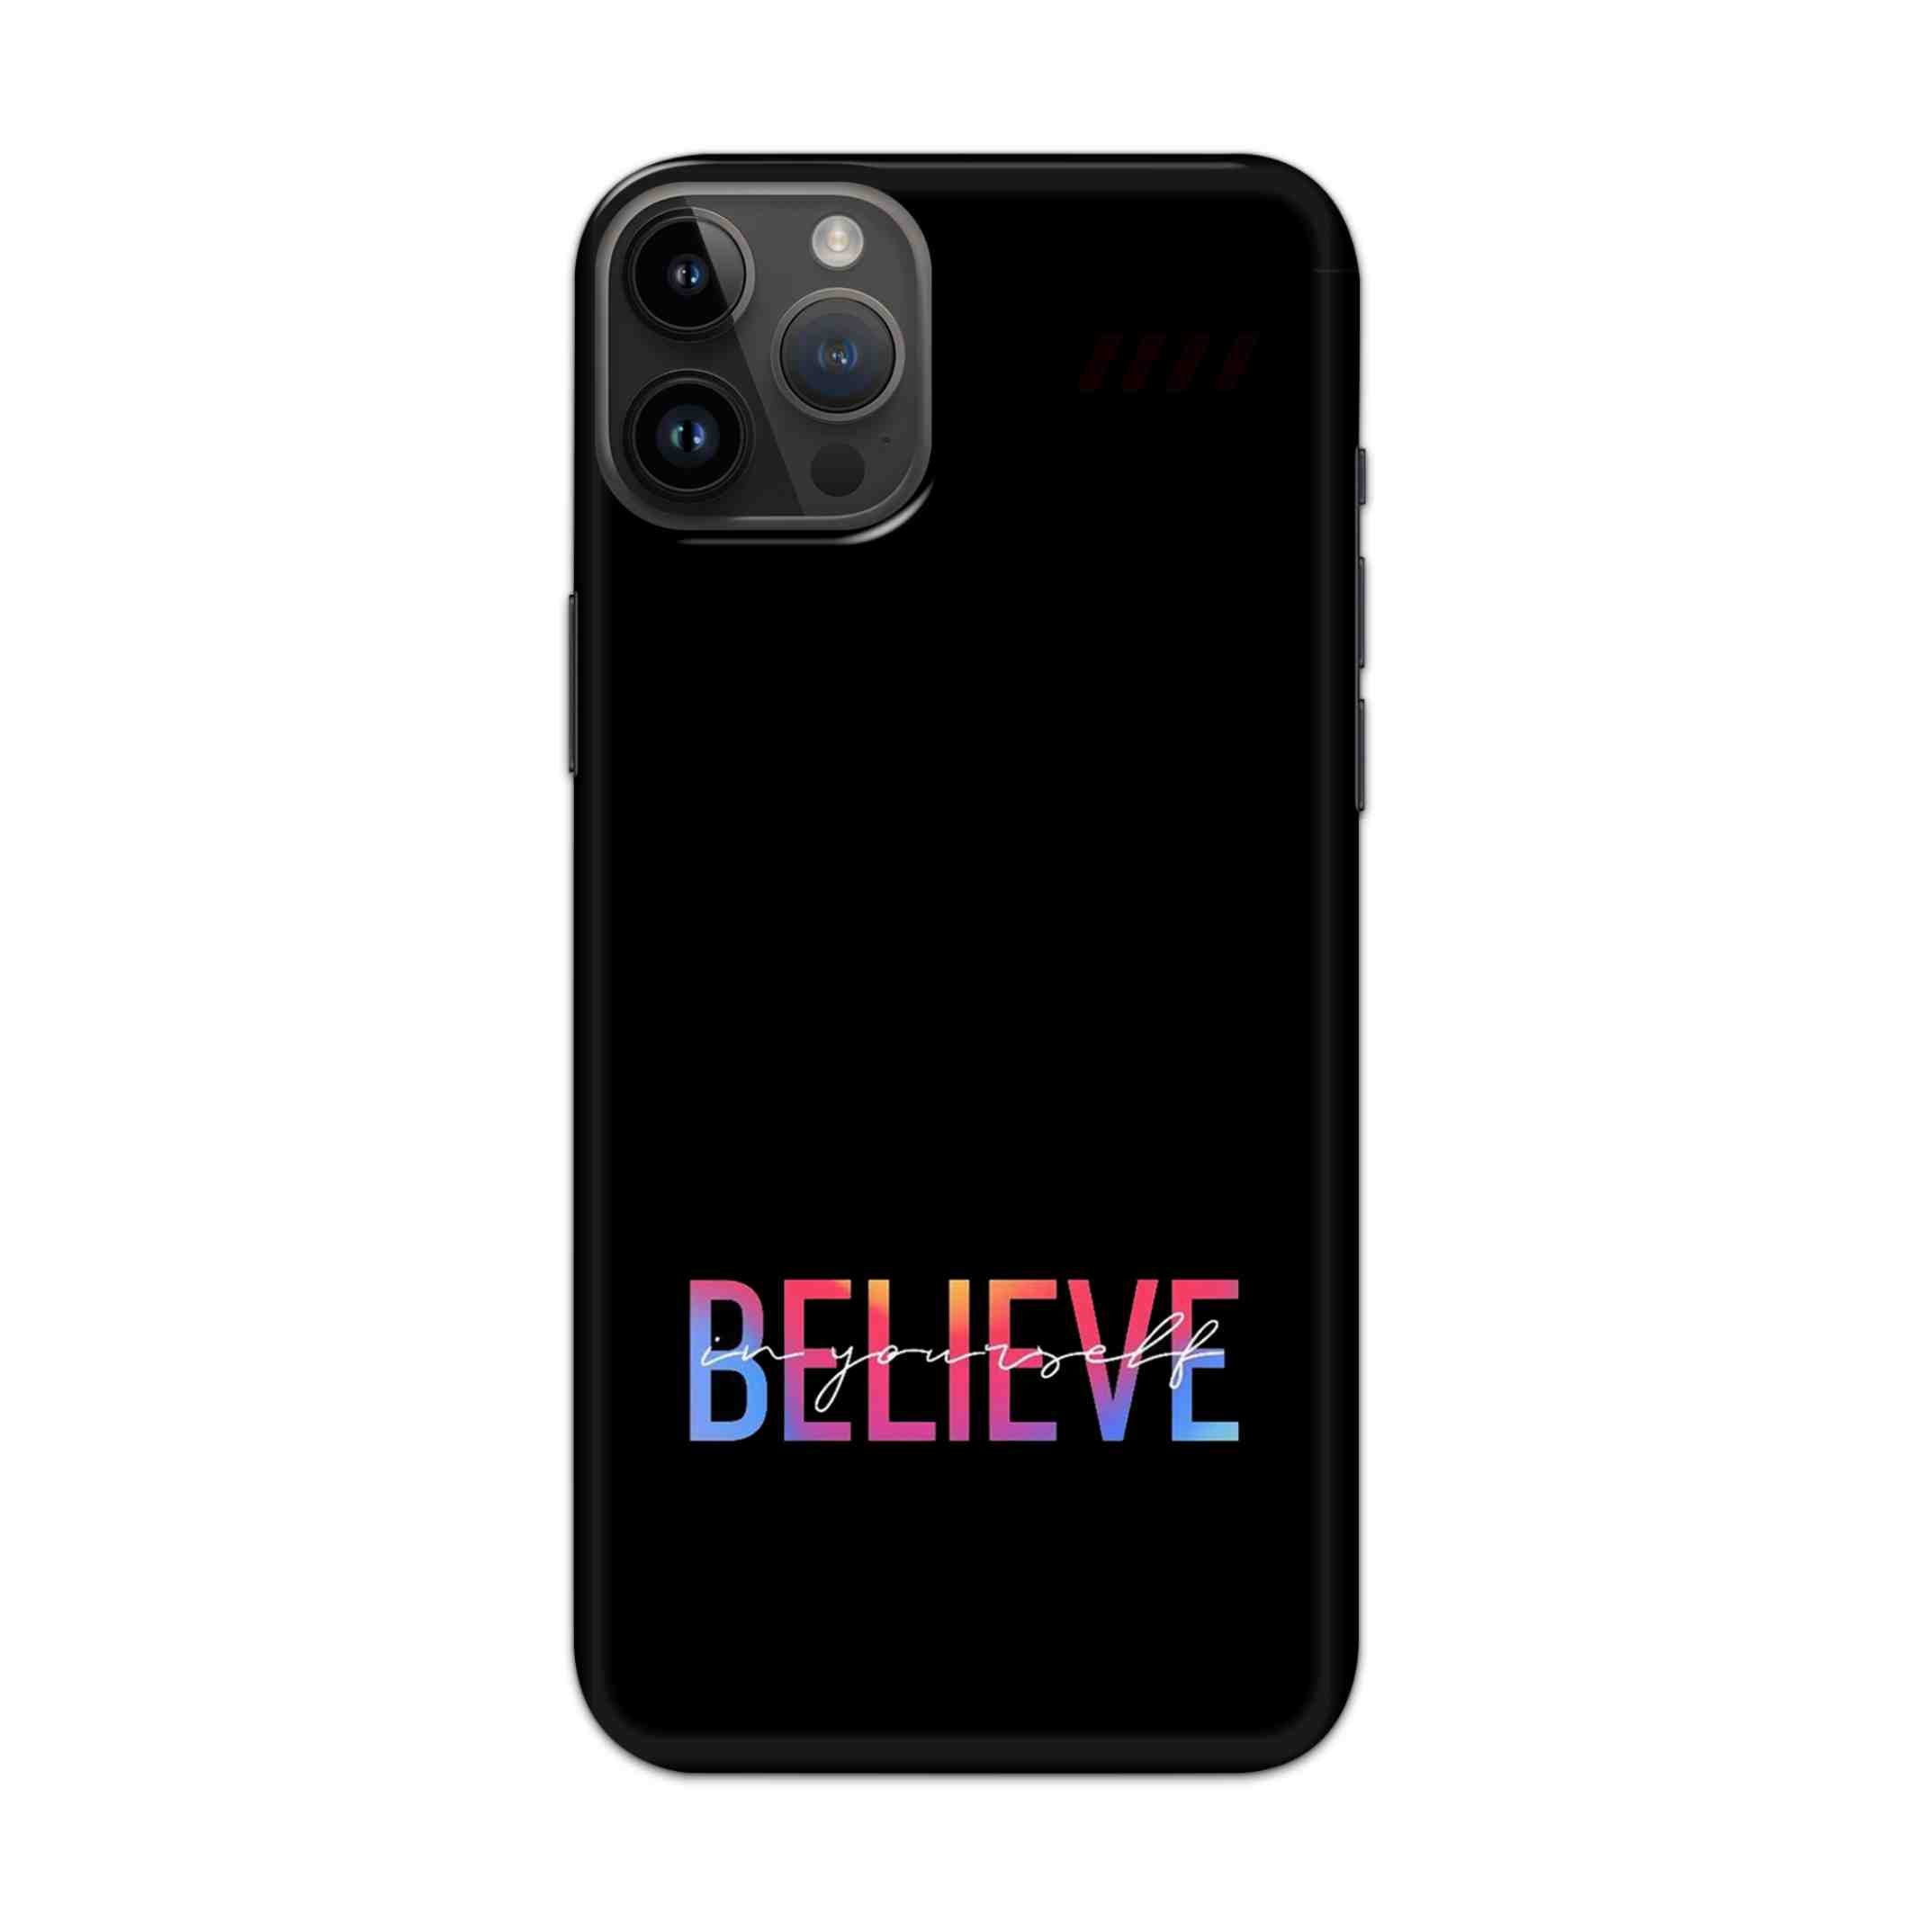 Buy Believe Hard Back Mobile Phone Case/Cover For iPhone 14 Pro Max Online